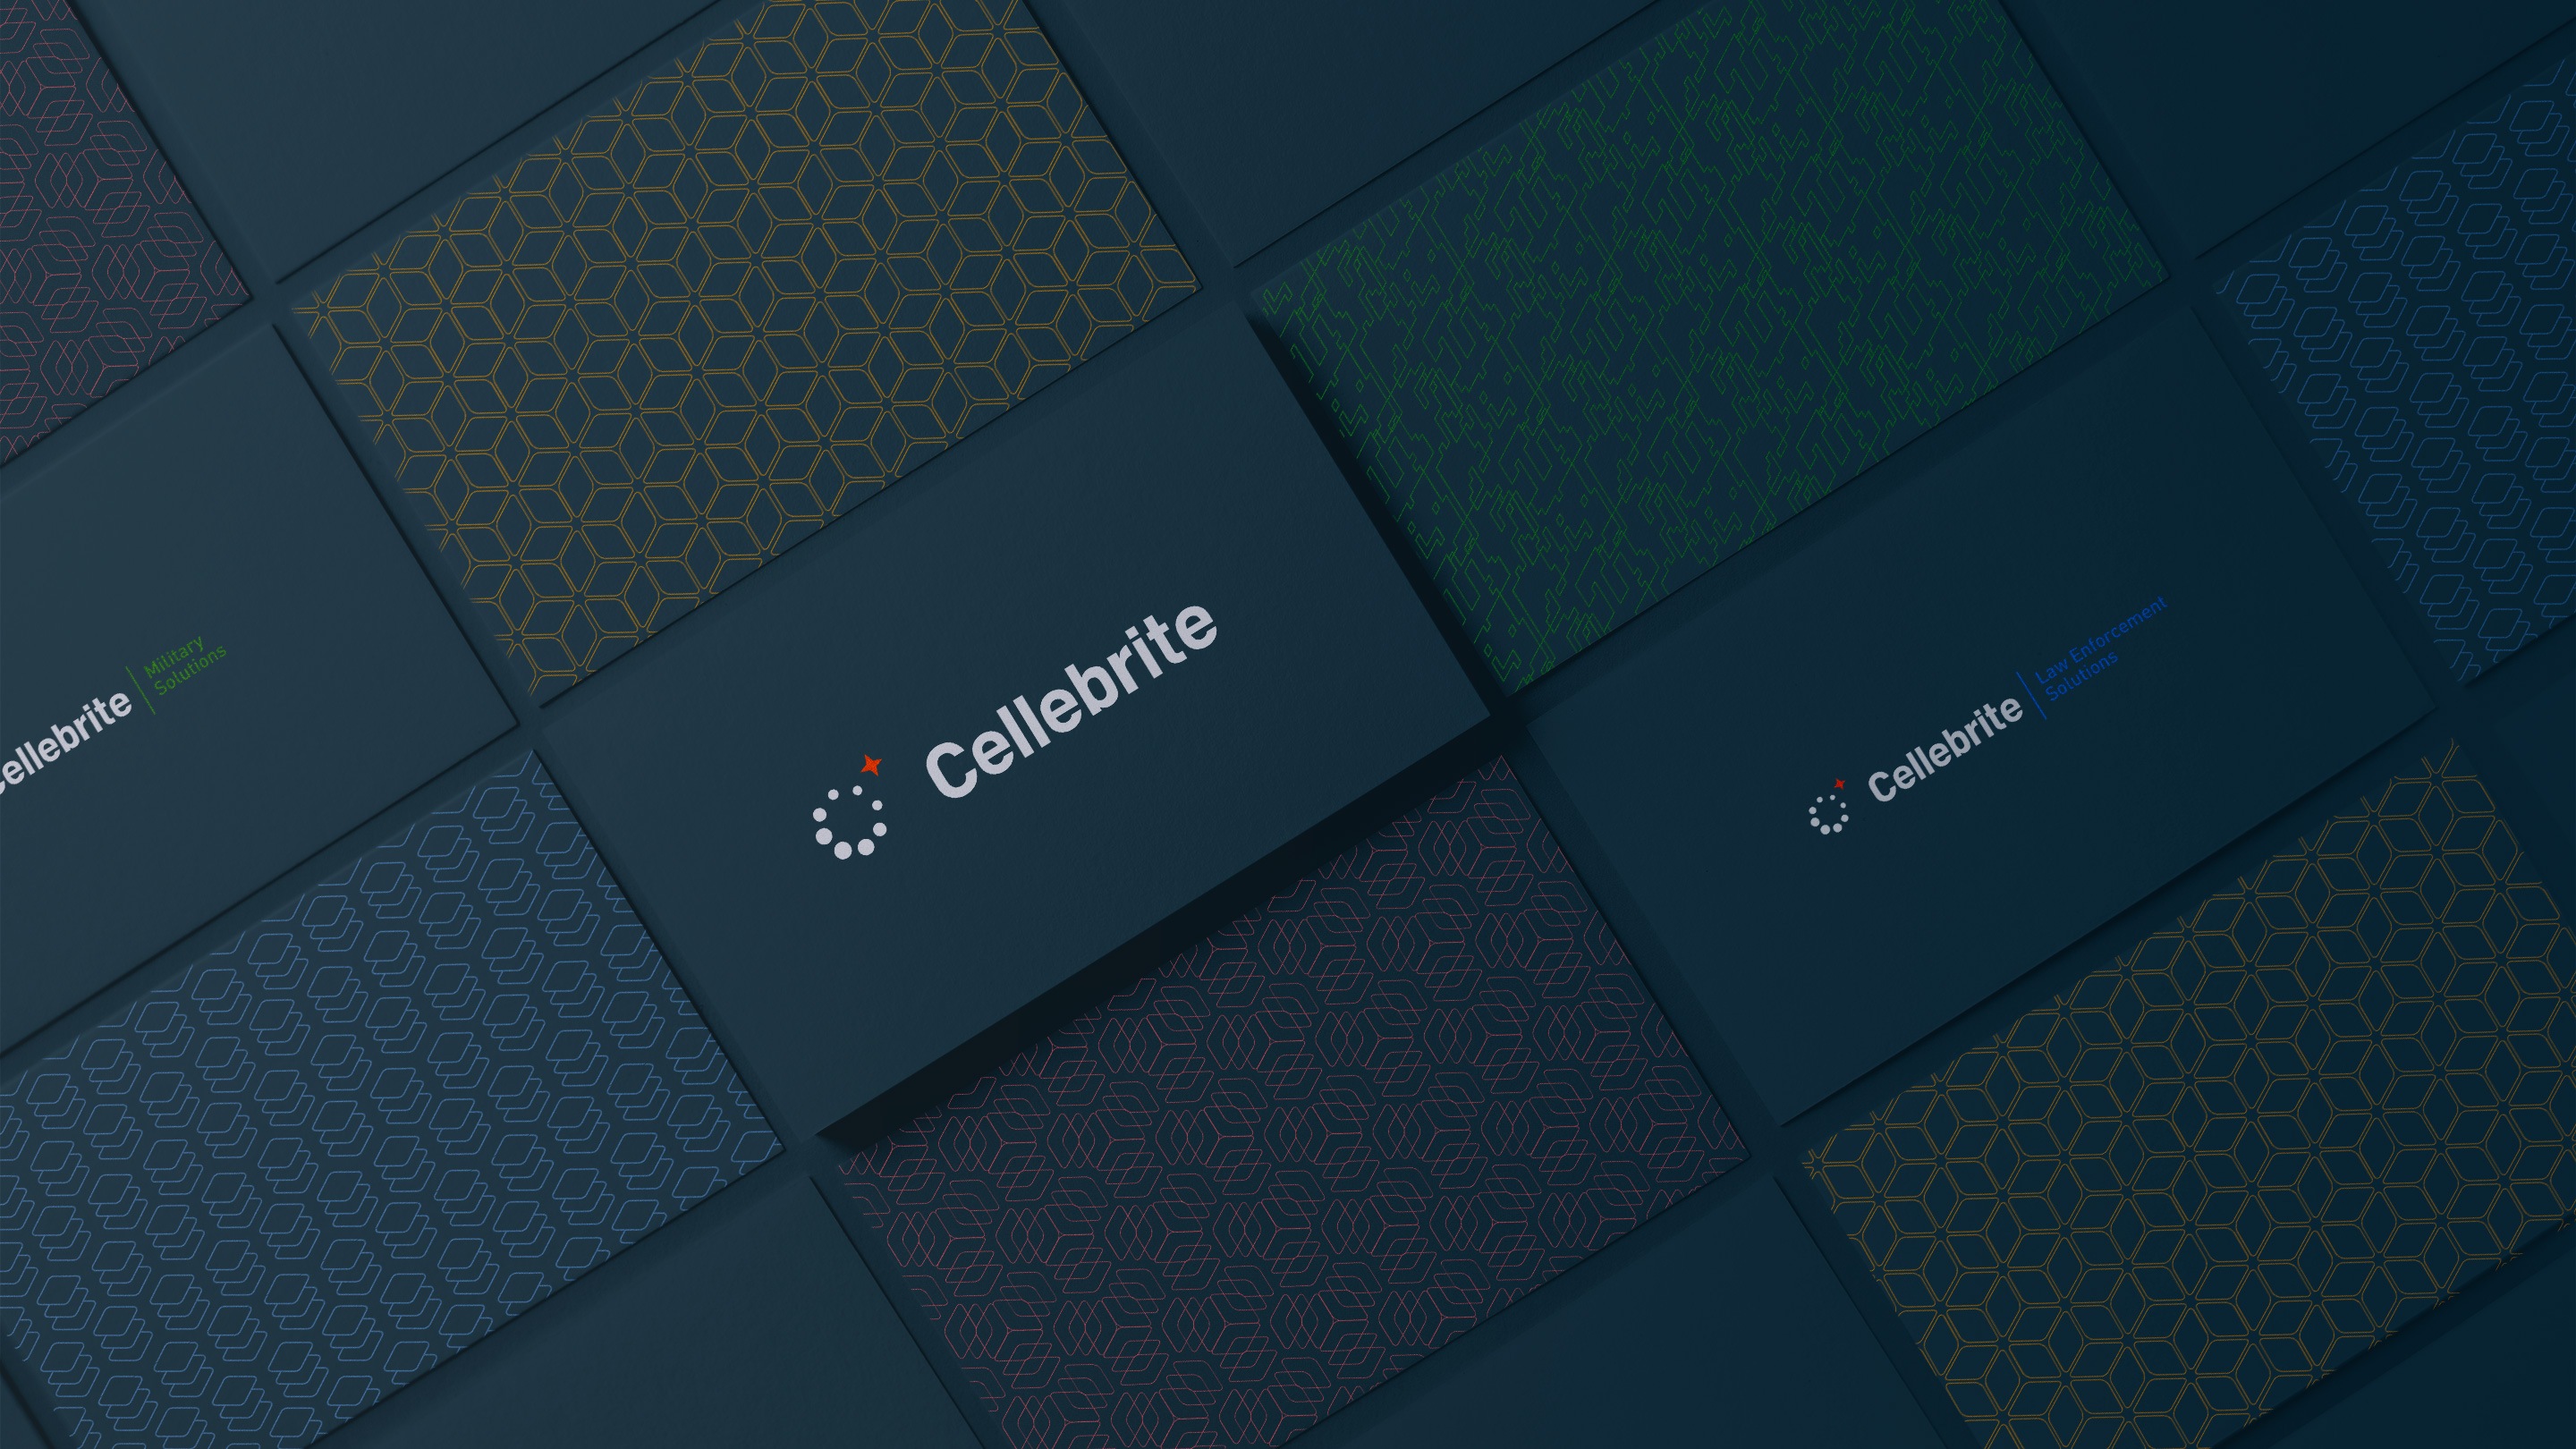 cellebrite logo family and solutions patterns